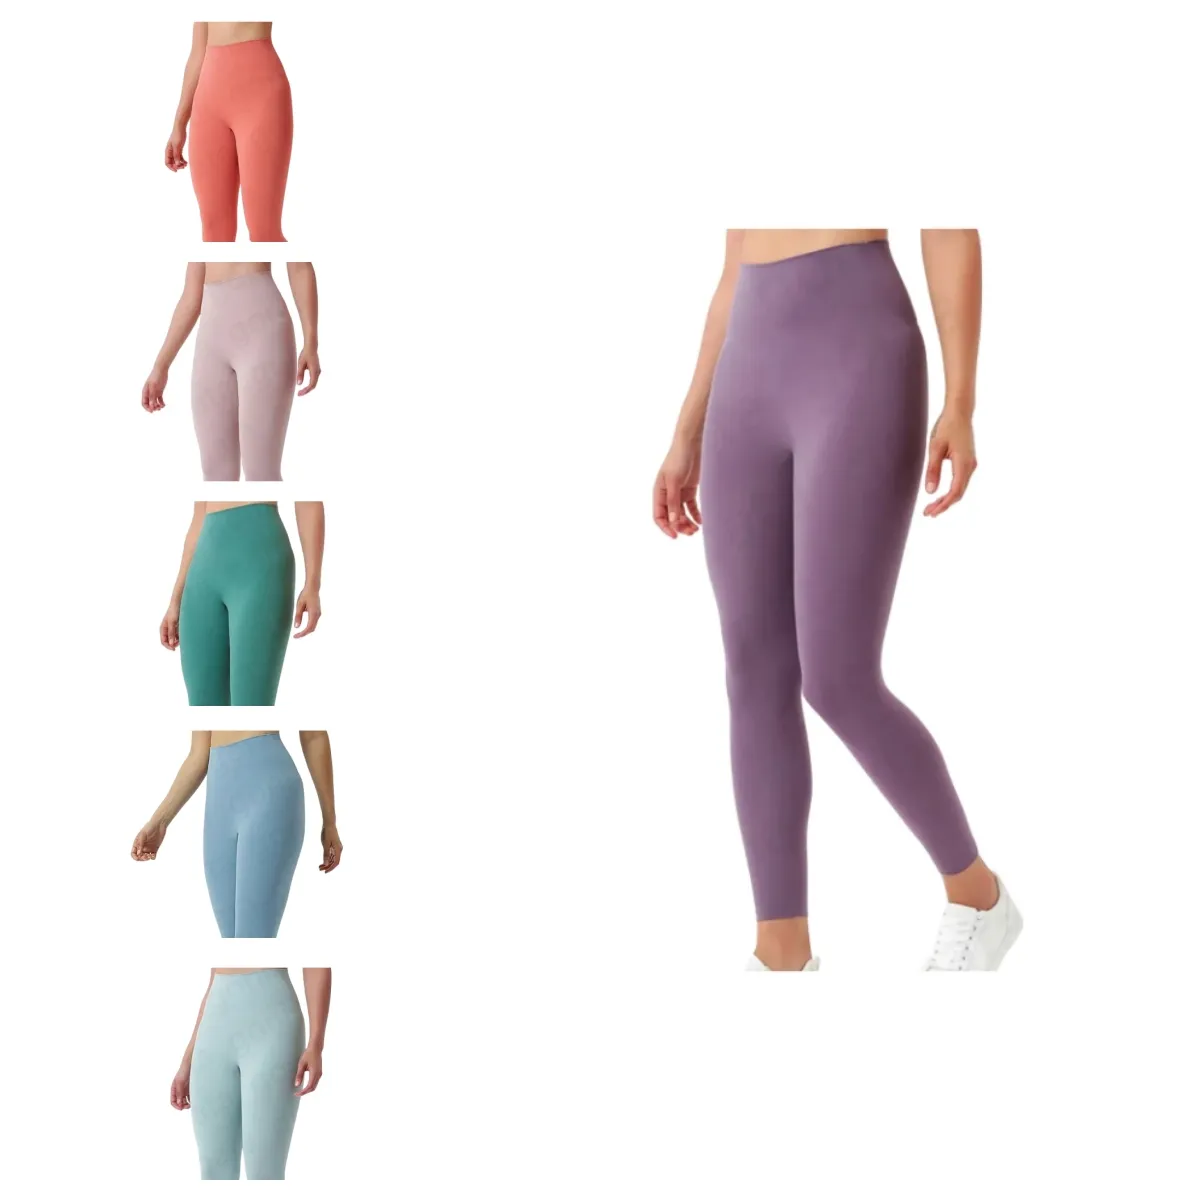 Lus Designer Fitness Athletic Solid Yoga Pants Womens Leggings Girls High Waist Running Outfits Woman Sports Legging Ladies Pants Workout